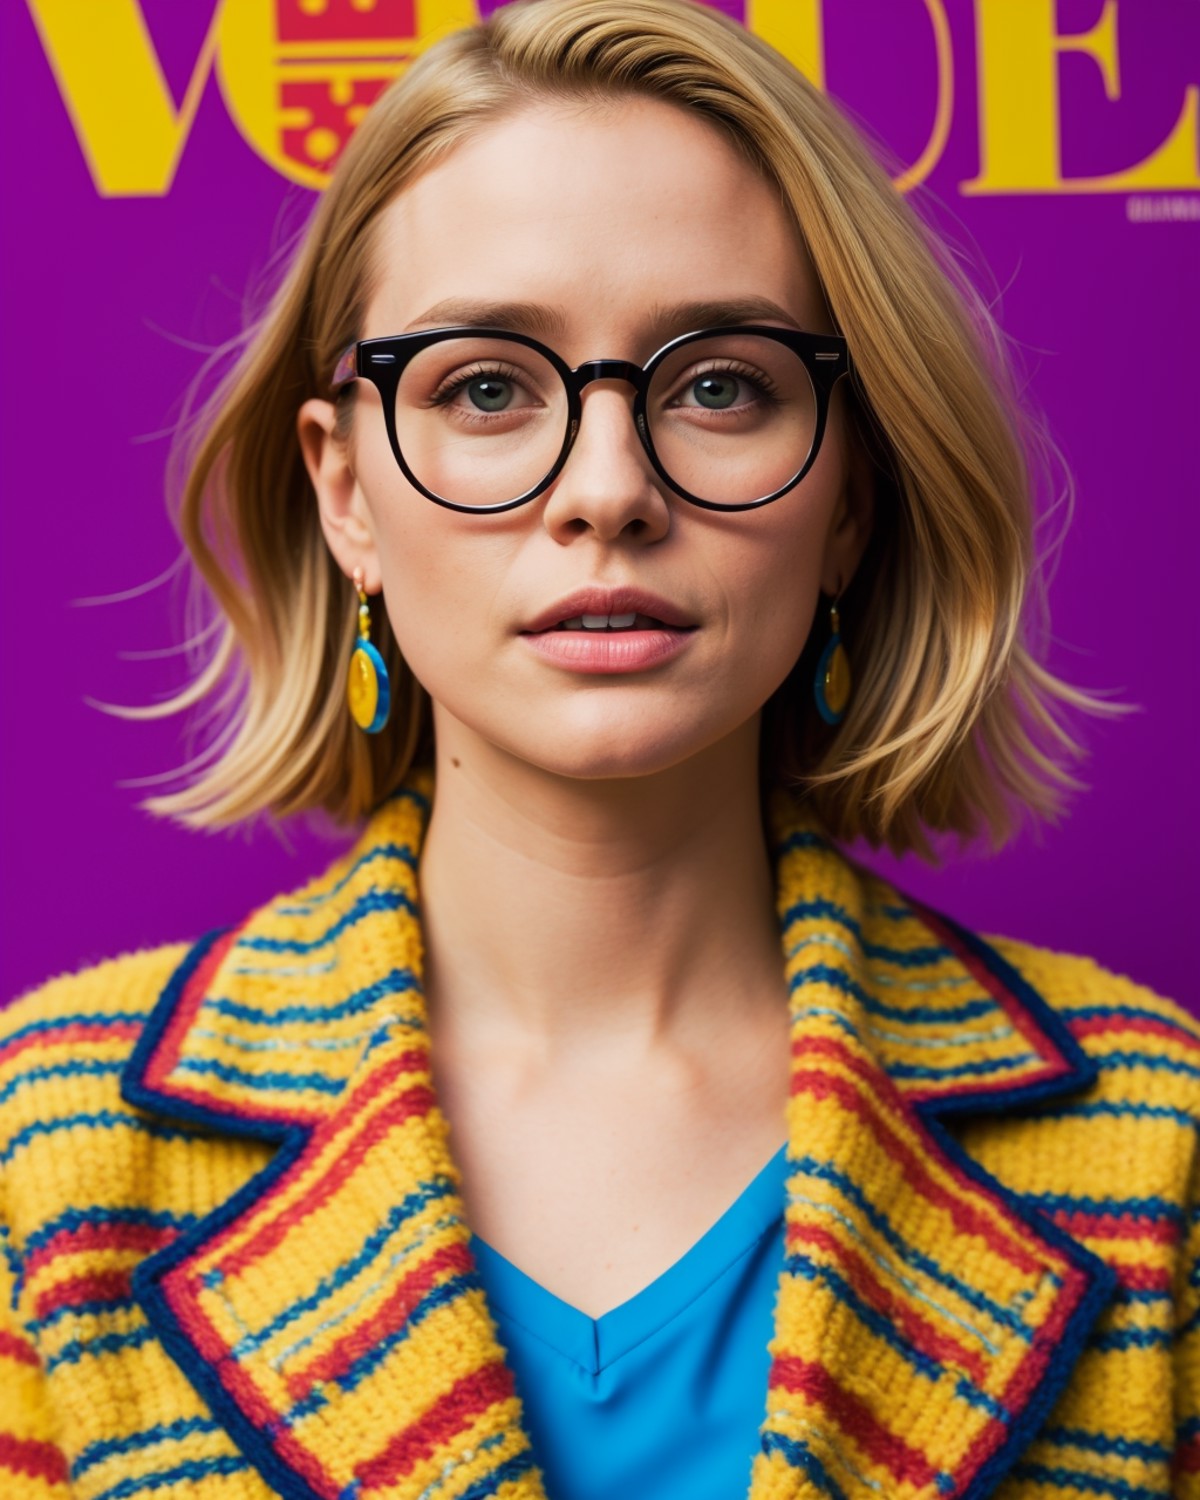 coat for a rave,big glasses, hairstyle, big earrings, multicolored, bright colors, many details, prints, photo for a magaz...